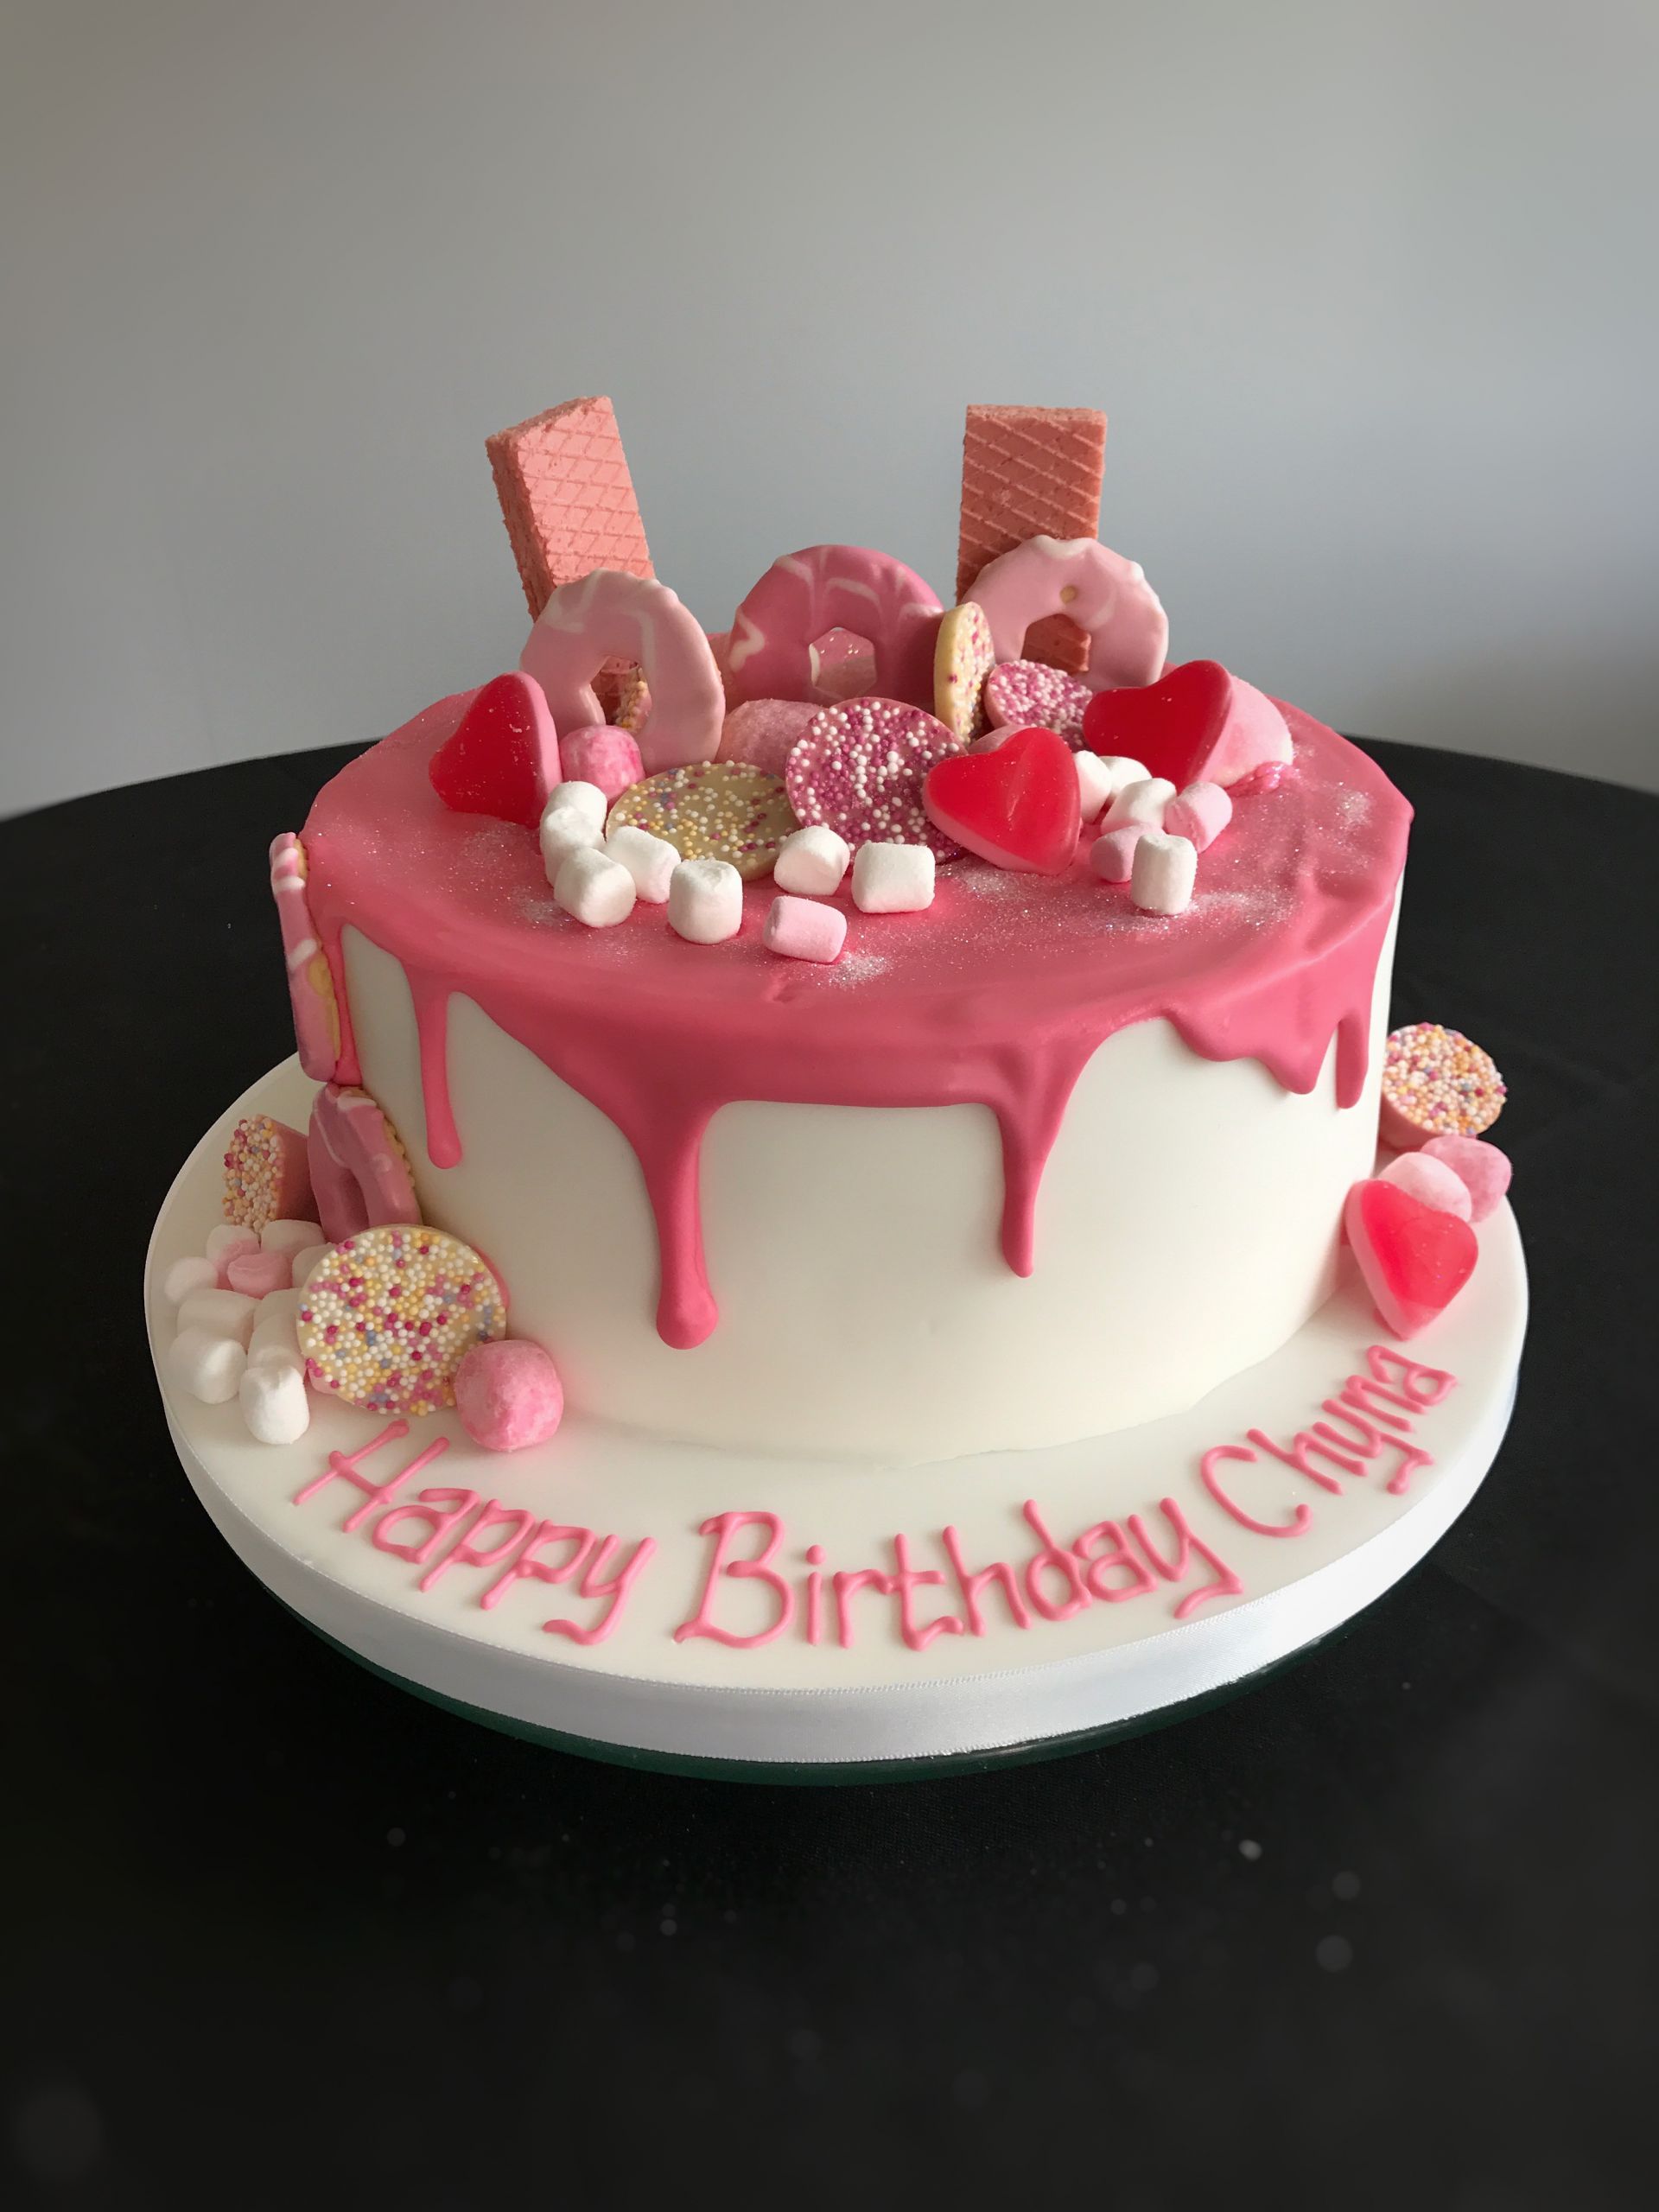 Pictures Of A Birthday Cake
 Female Birthday Cakes Bedfordshire Hertfordshire London